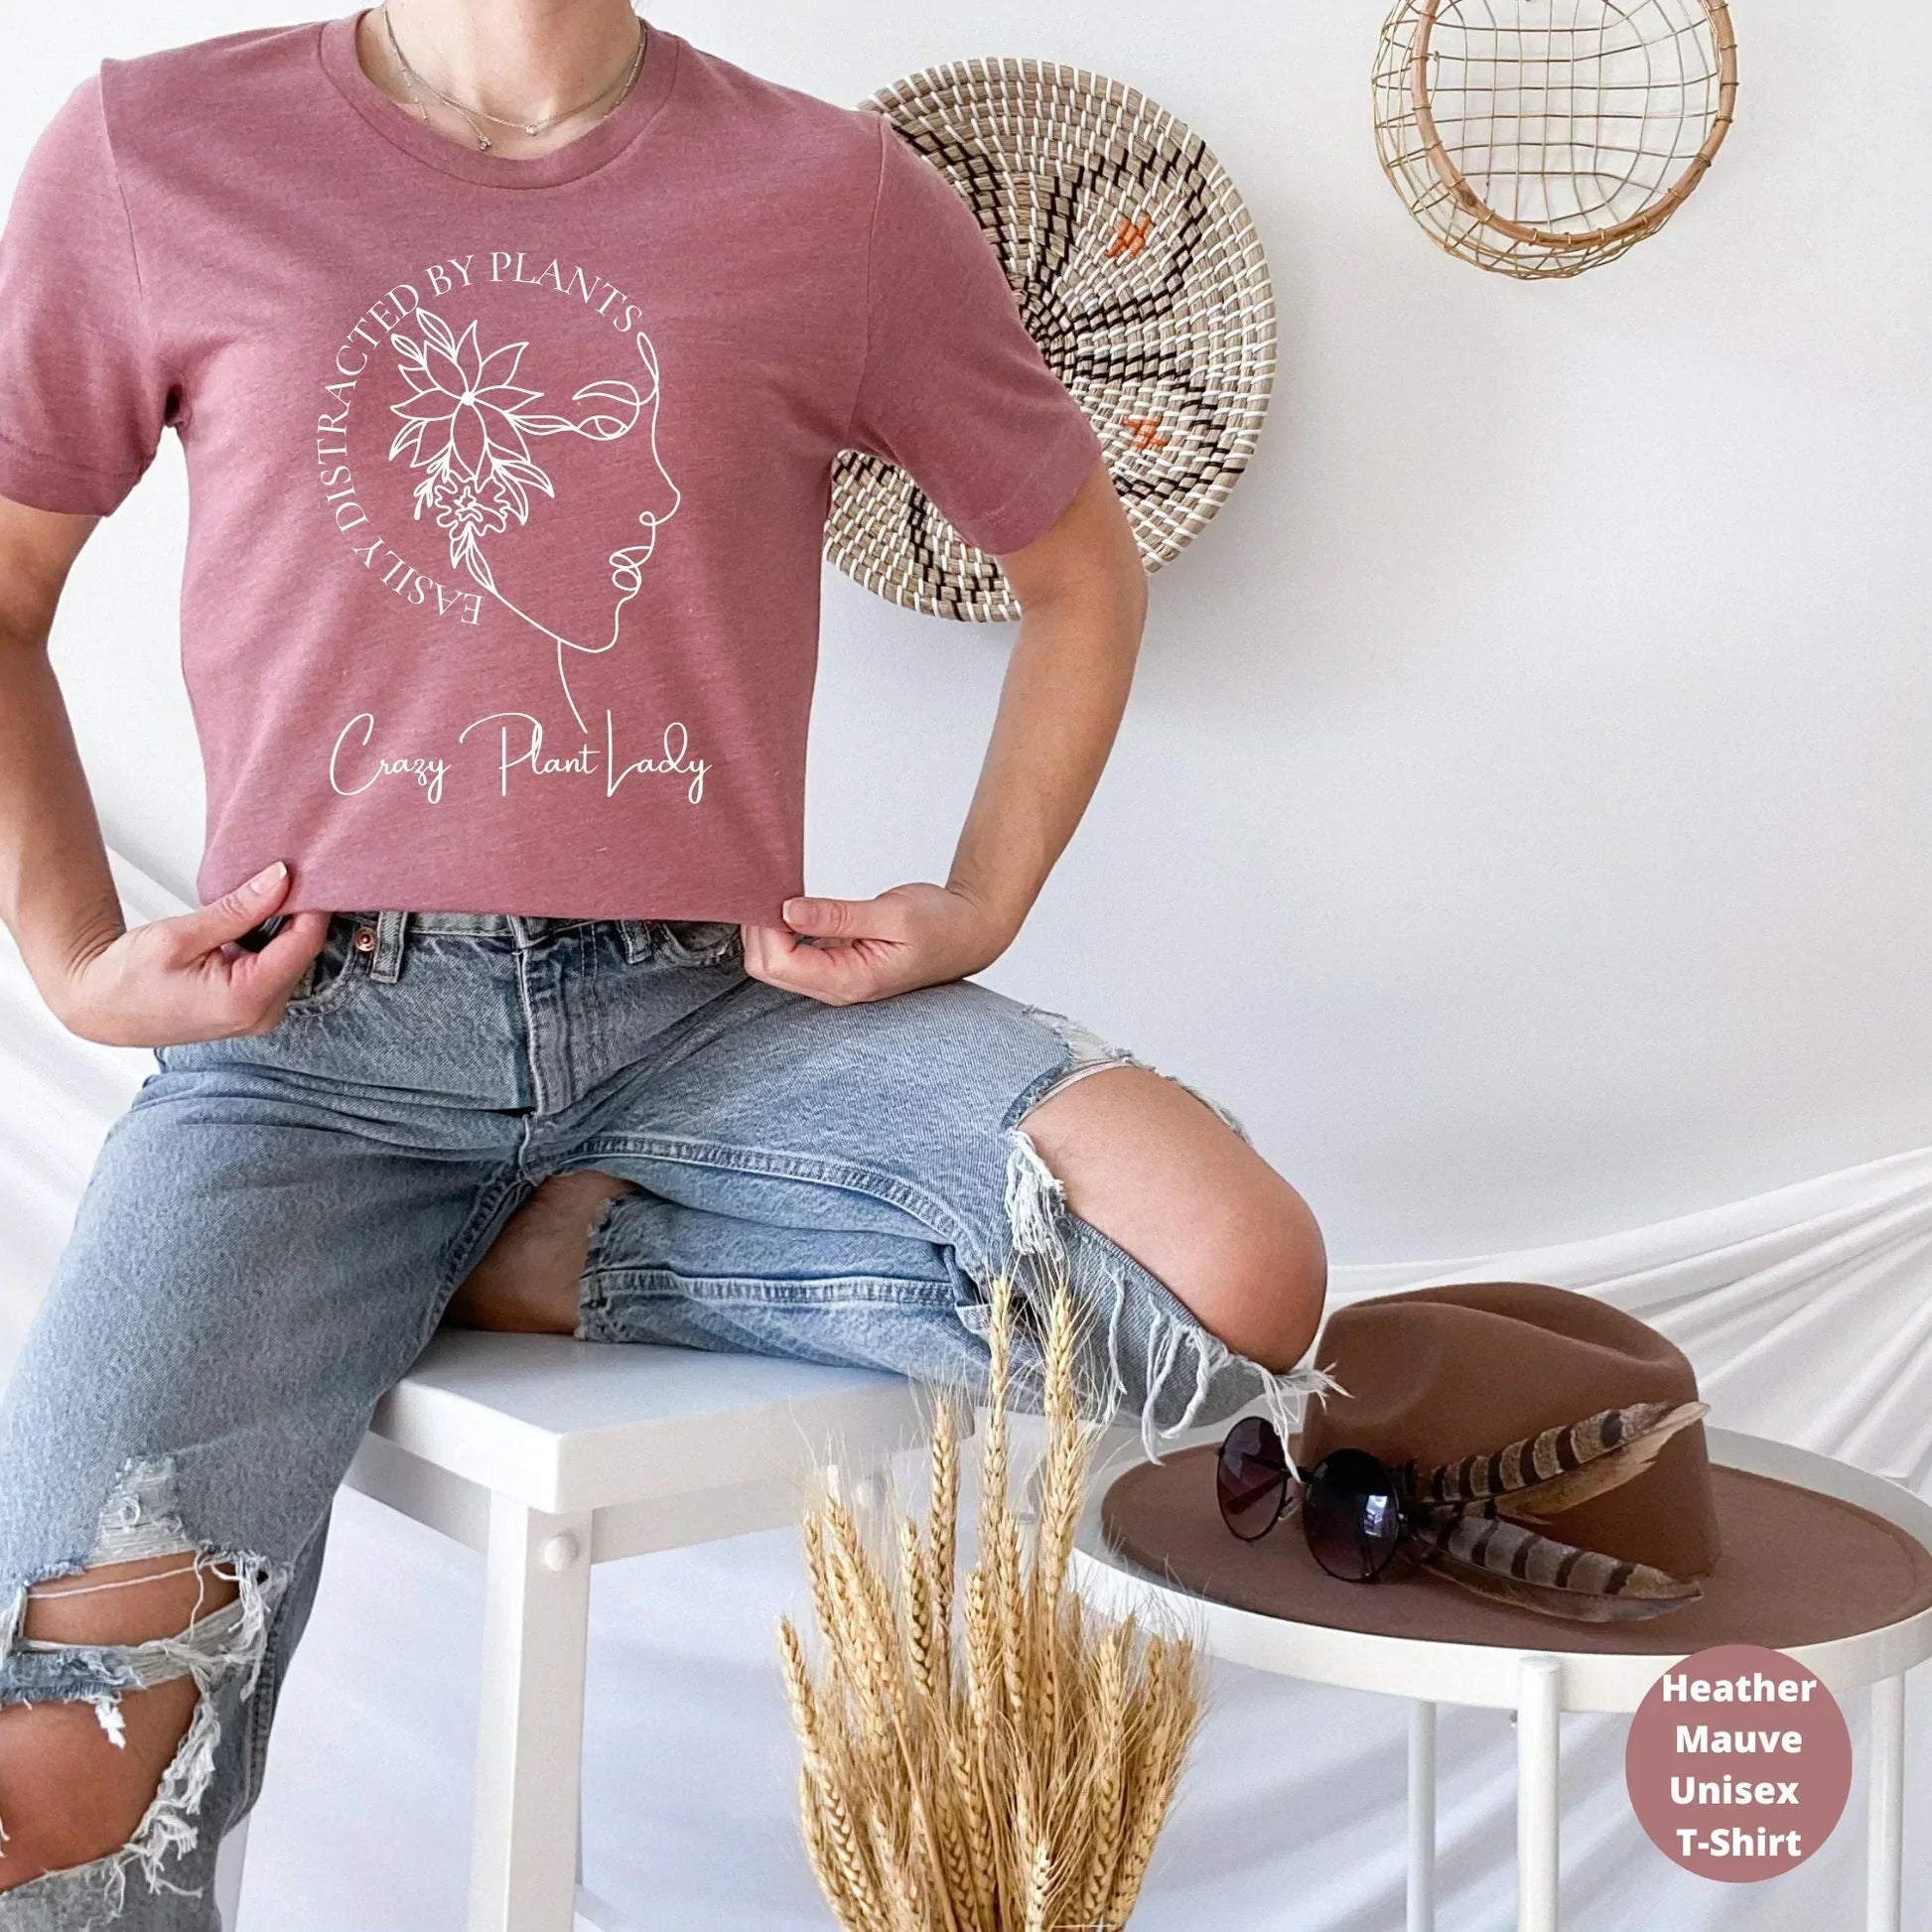 Crazy Plant Lady - Easily Distracted by plants - Plant Mom - Plant Lady Shirt - Plant Mom Gift - Vegan Shirt - Plant Lover Tee - Plant Based HMDesignStudioUS